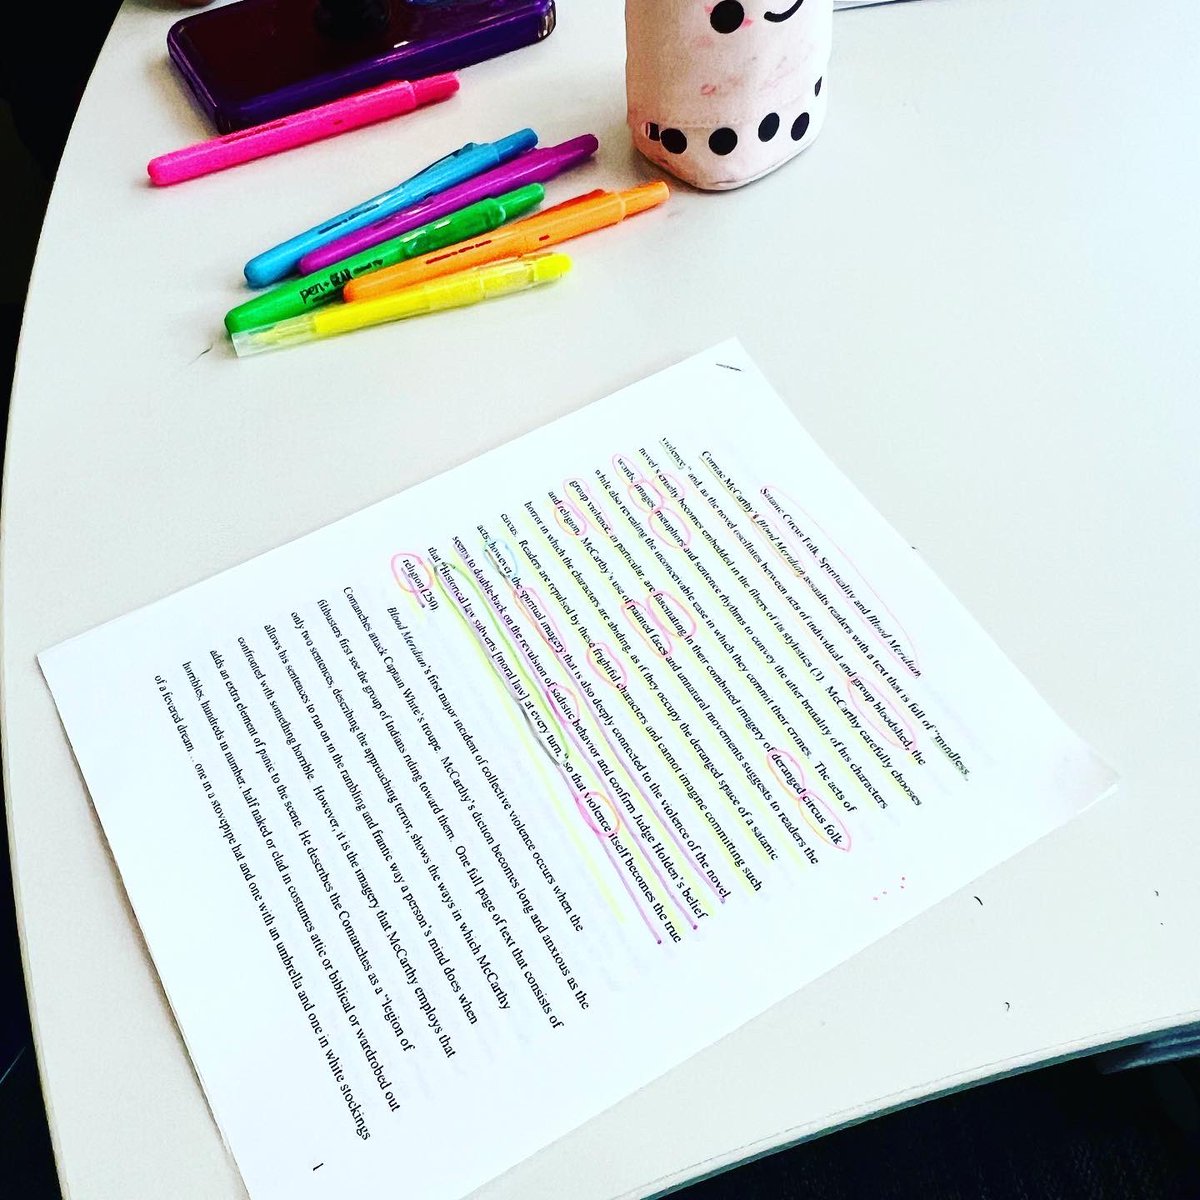 Color-coding a literary analysis paper with AP Lit! 🌈💚✍🏻

@BryanAdamsHS @DISD_Libraries 

#write #literaryanalysis #aplit #english #highschool #library #colorcode